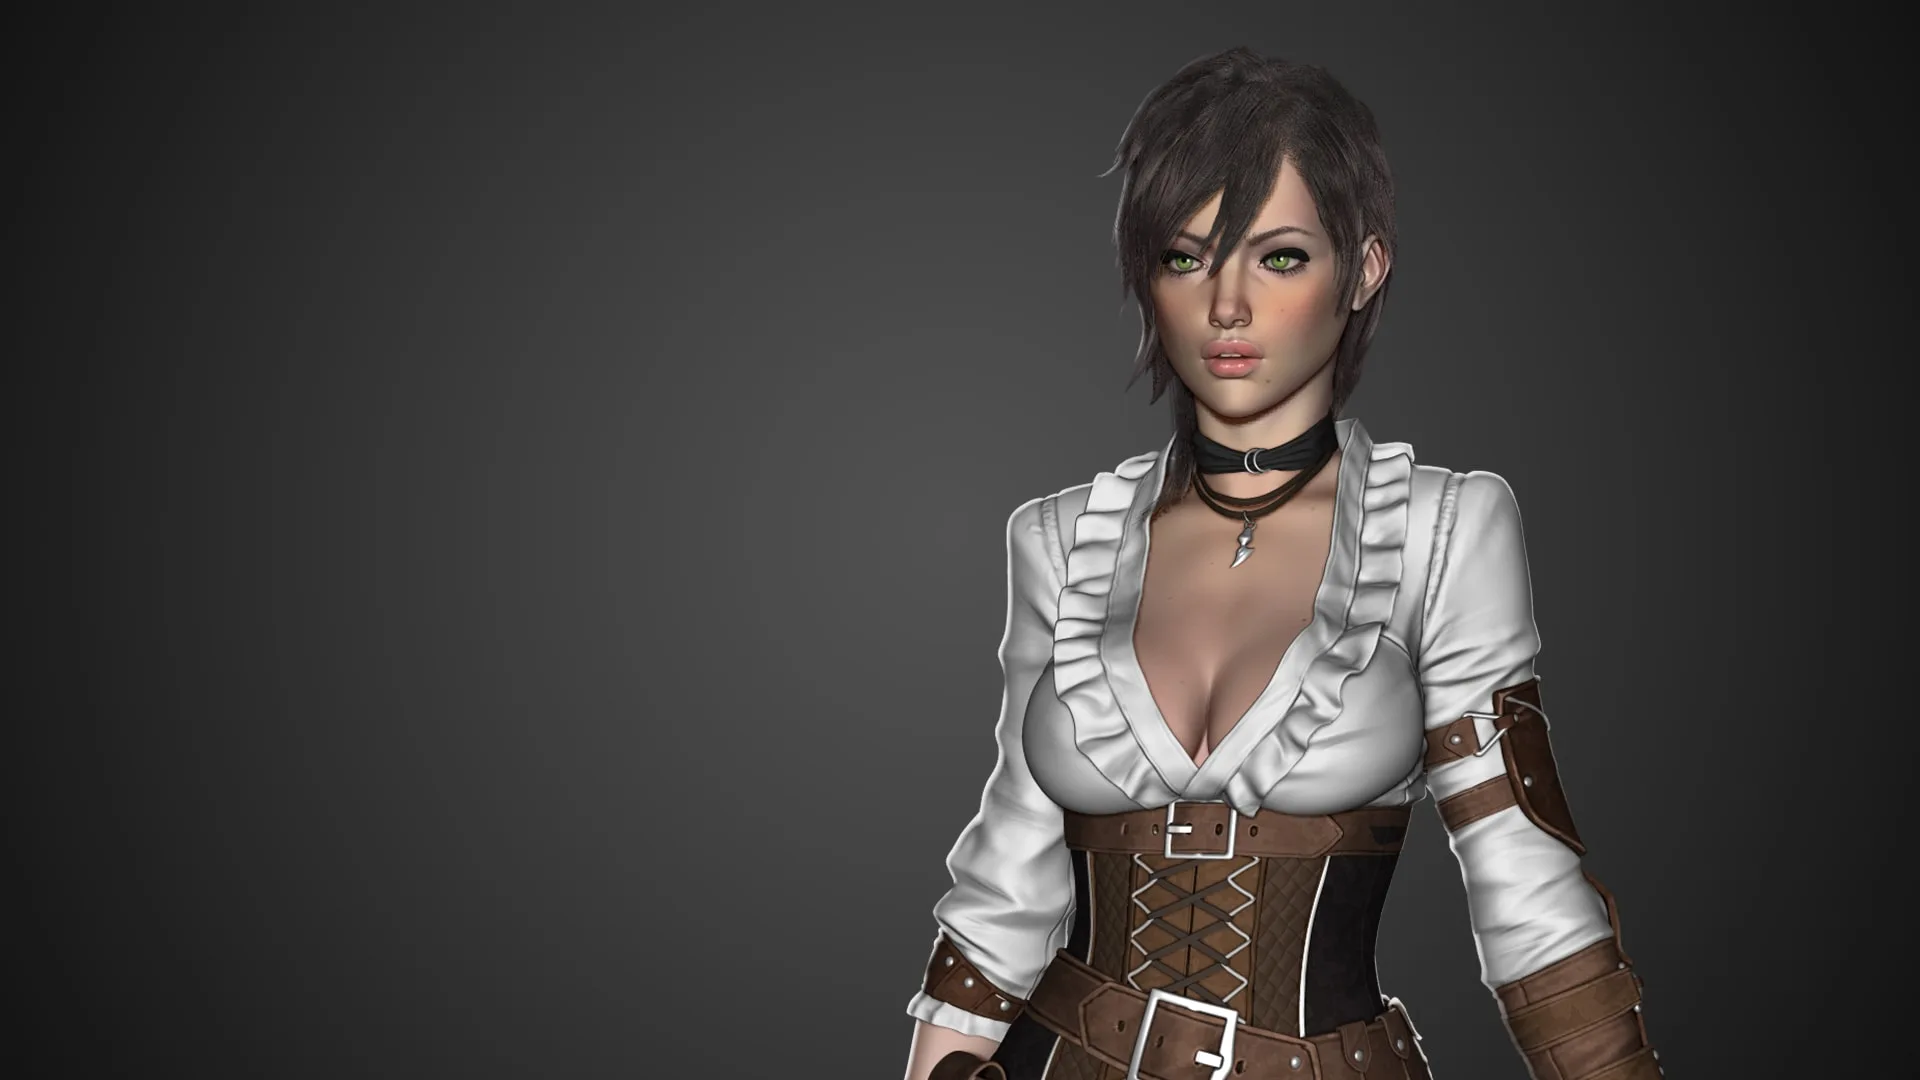 Female Character Creation In ZBrush